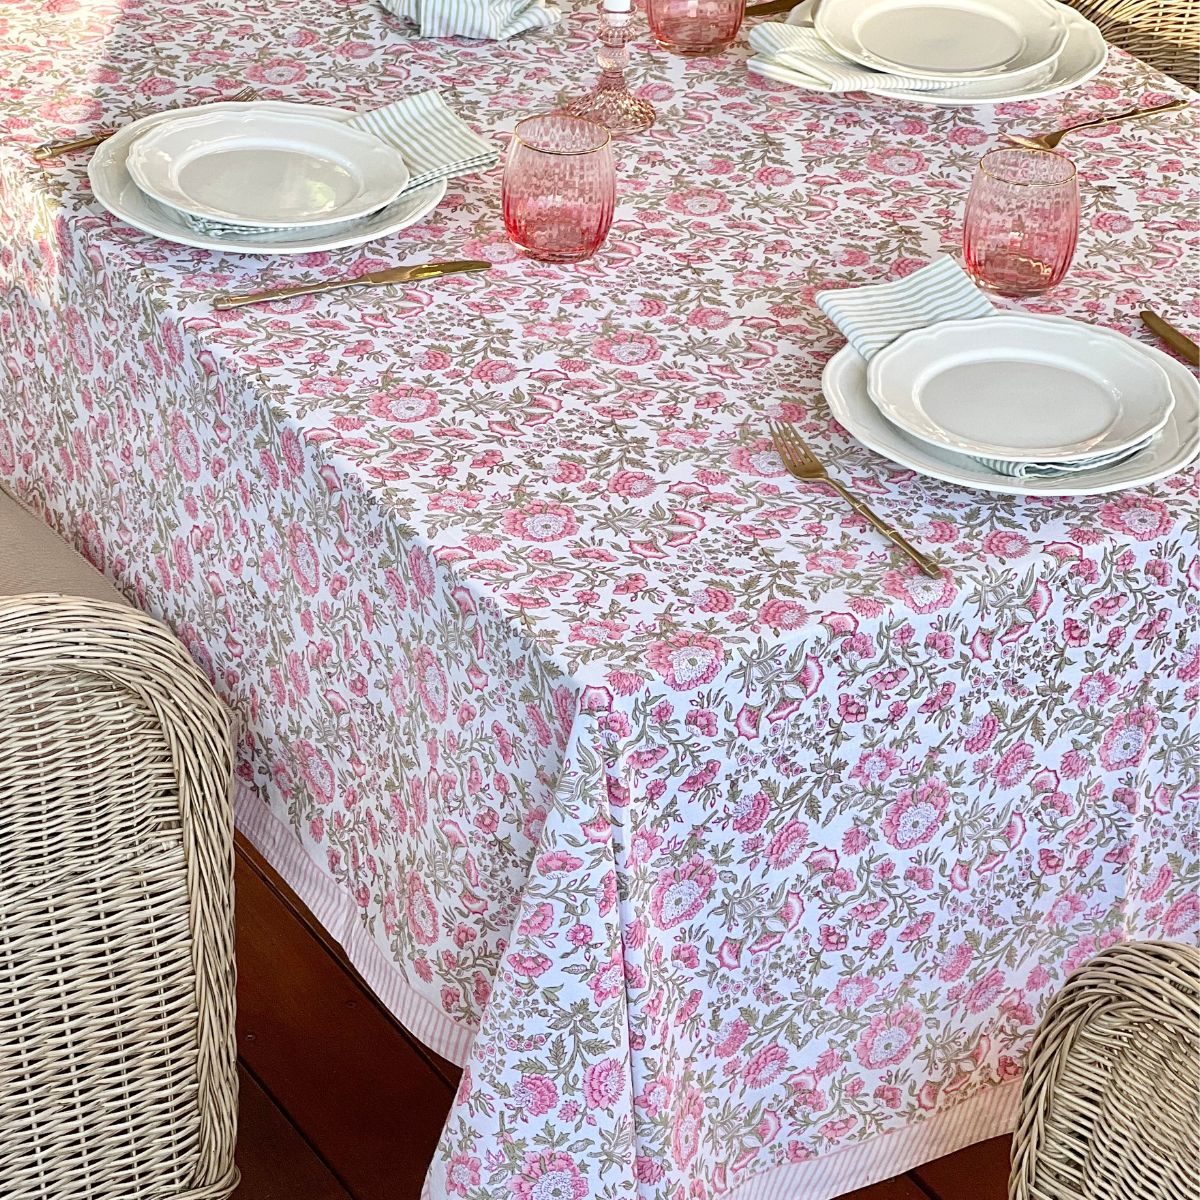 Sample Beatrice pink and green Tablecloth 180 x 345 cm